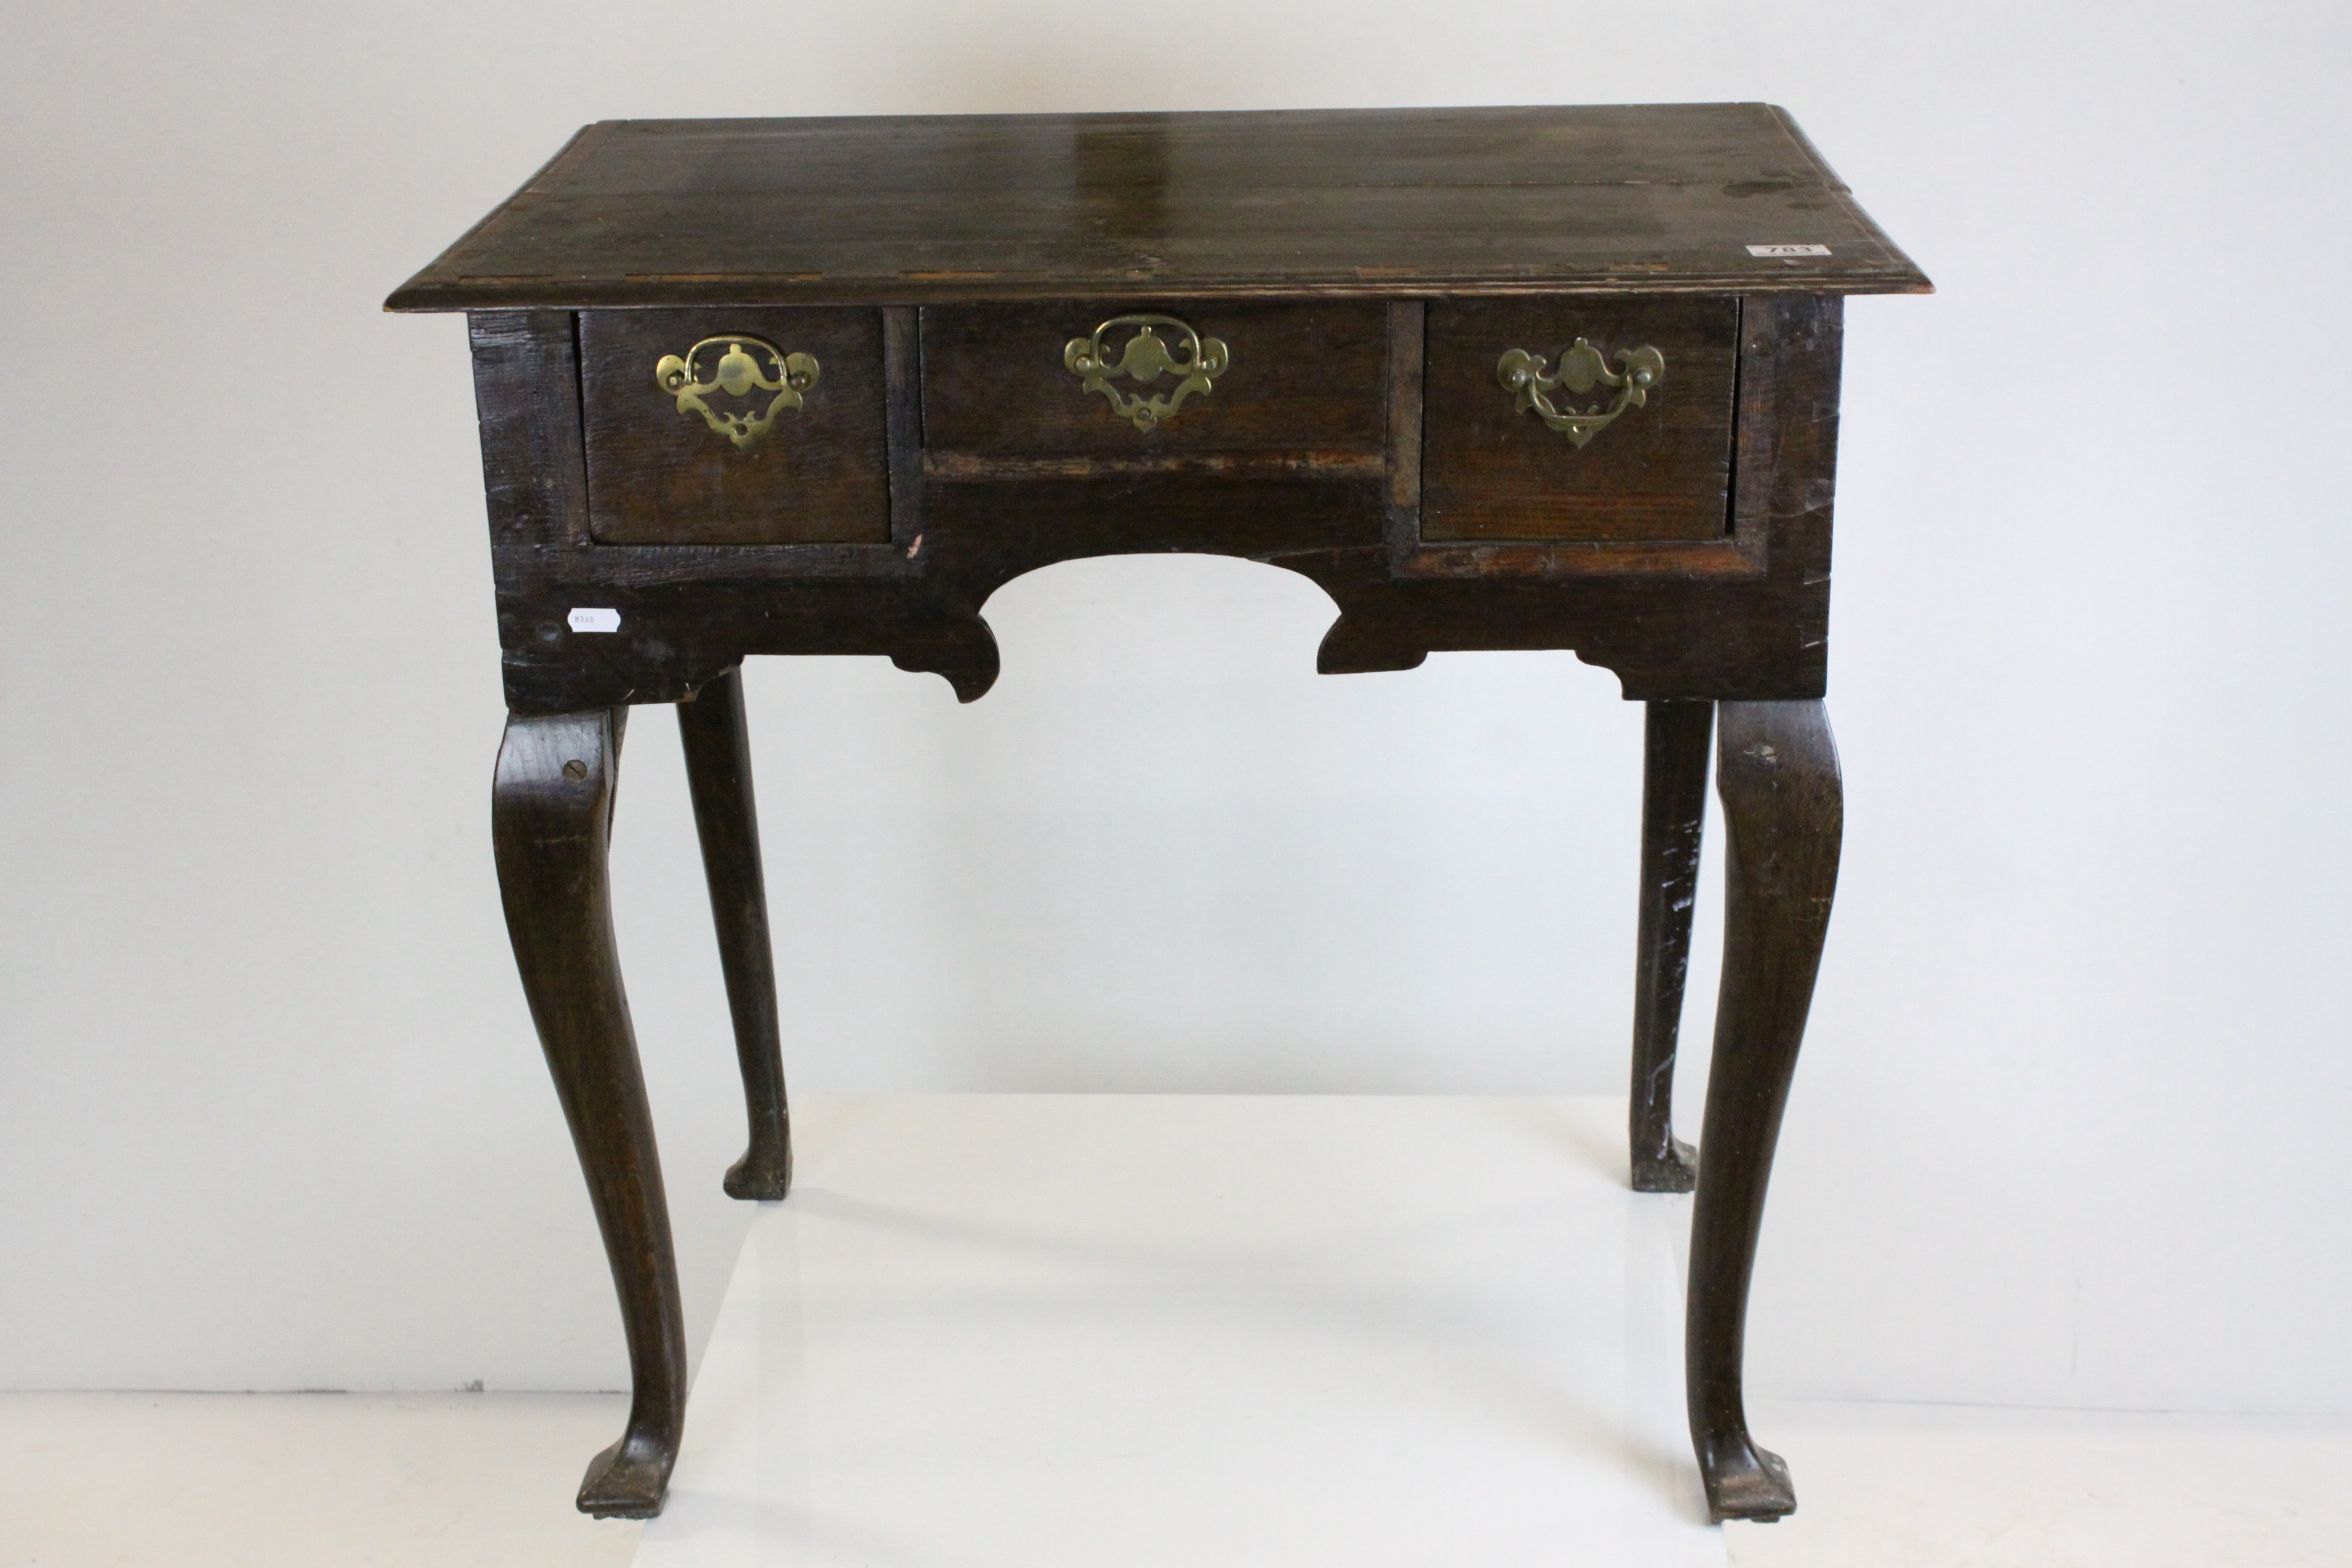 George II Oak and Walnut Side Table with an arrangement of Three Drawers, shaped aprons and front